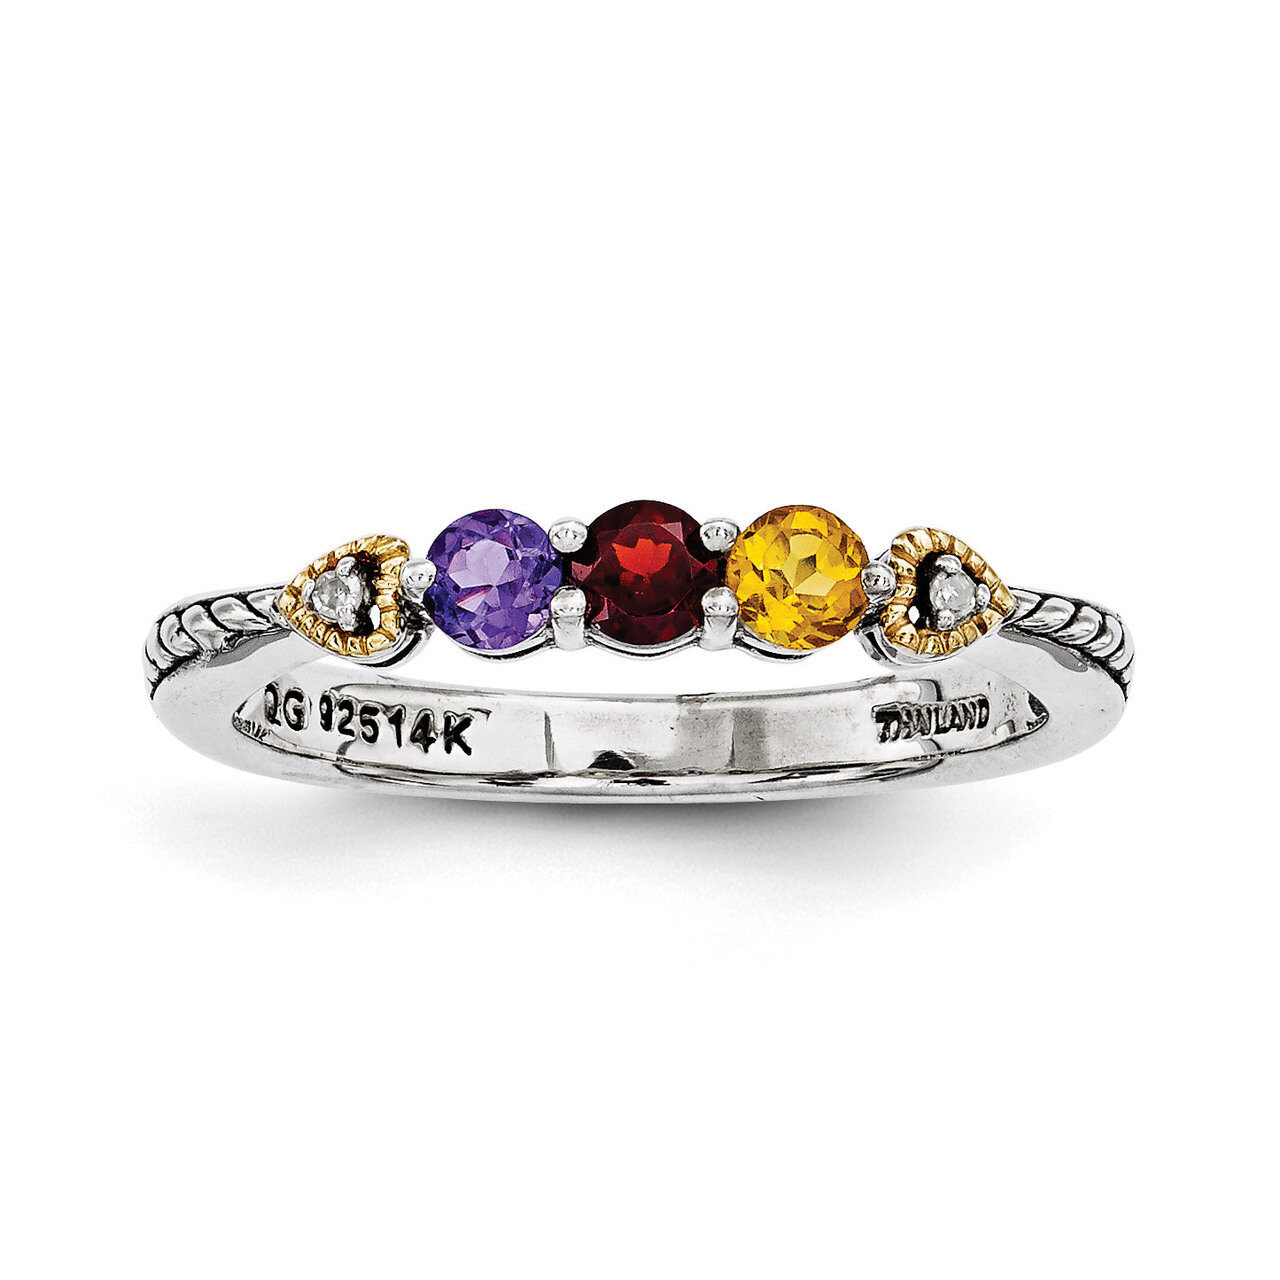 3 Birthstones & 14k Three-stone and Diamond Mother's Semi-Mount Ring Sterling Silver QMR18/3-10